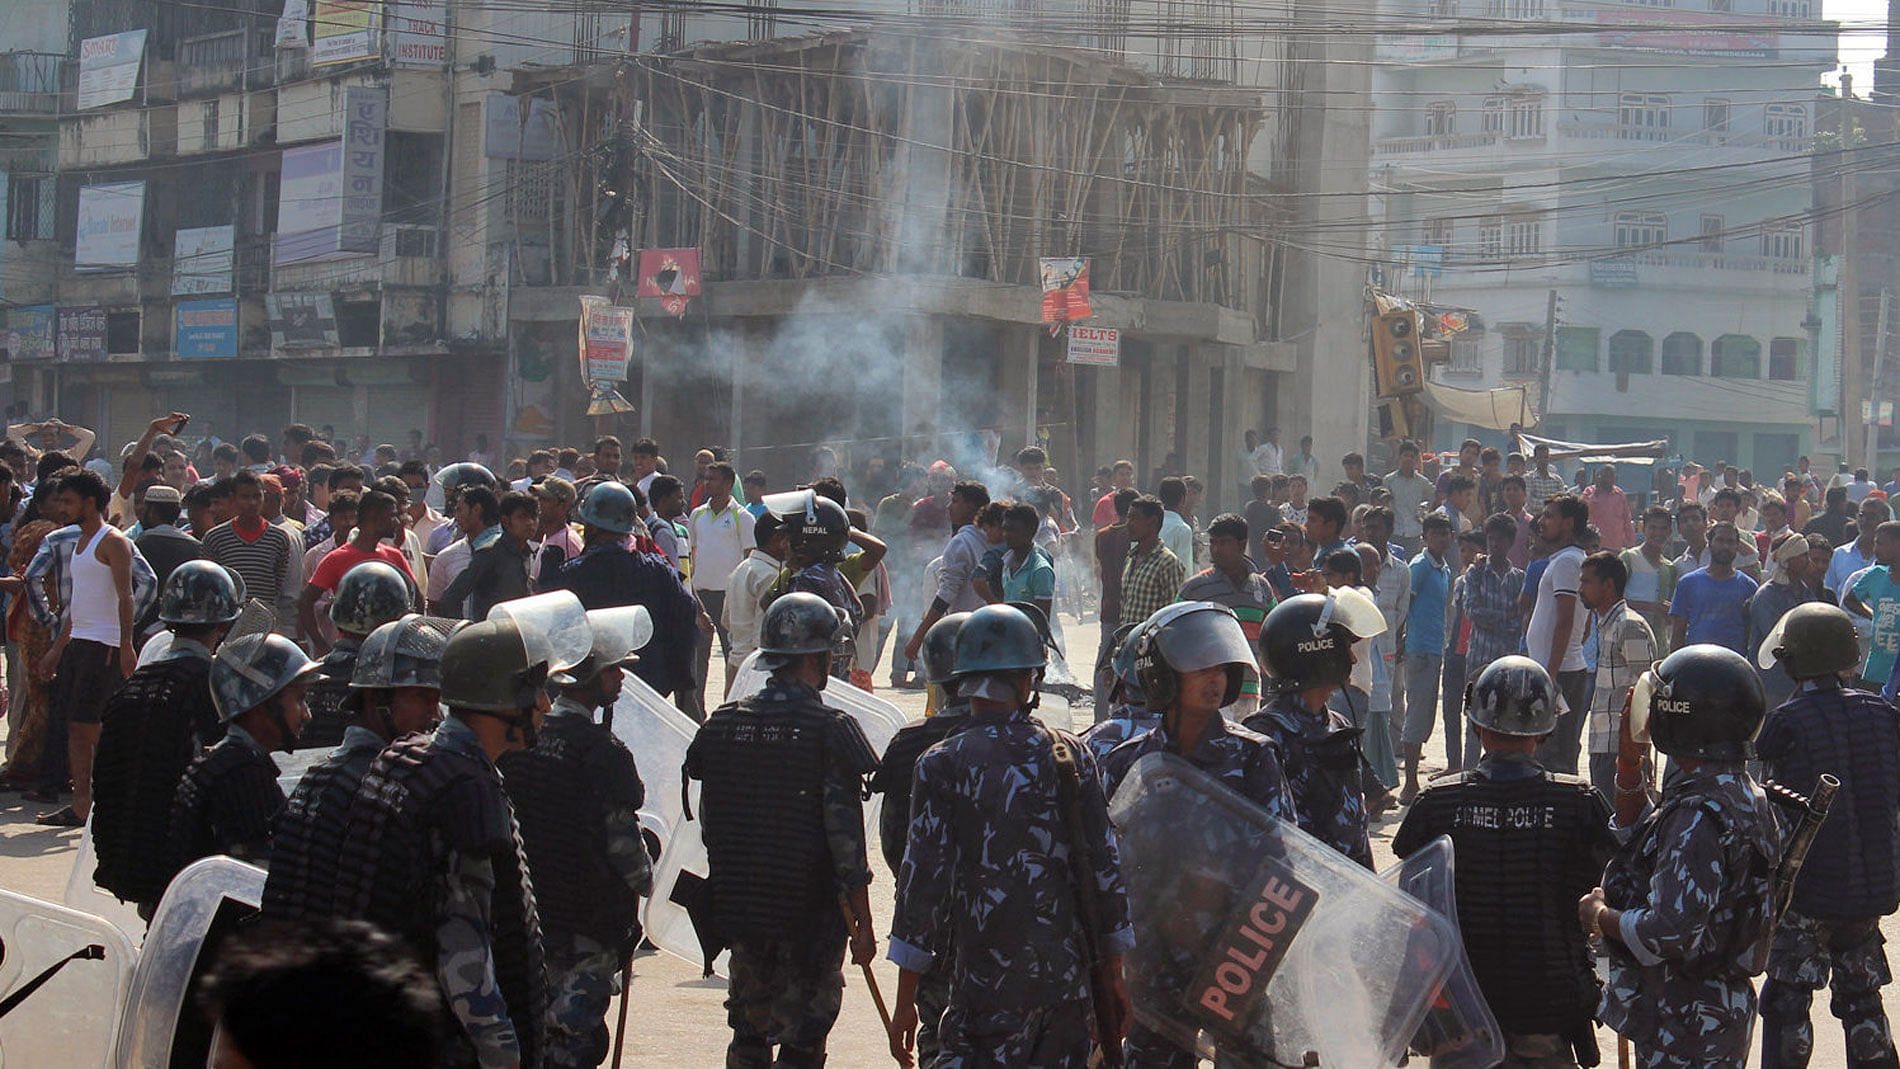 Police and Madhesi protesters clashed at the Indo-Nepal border region of Birgunj. (Photo: AP)